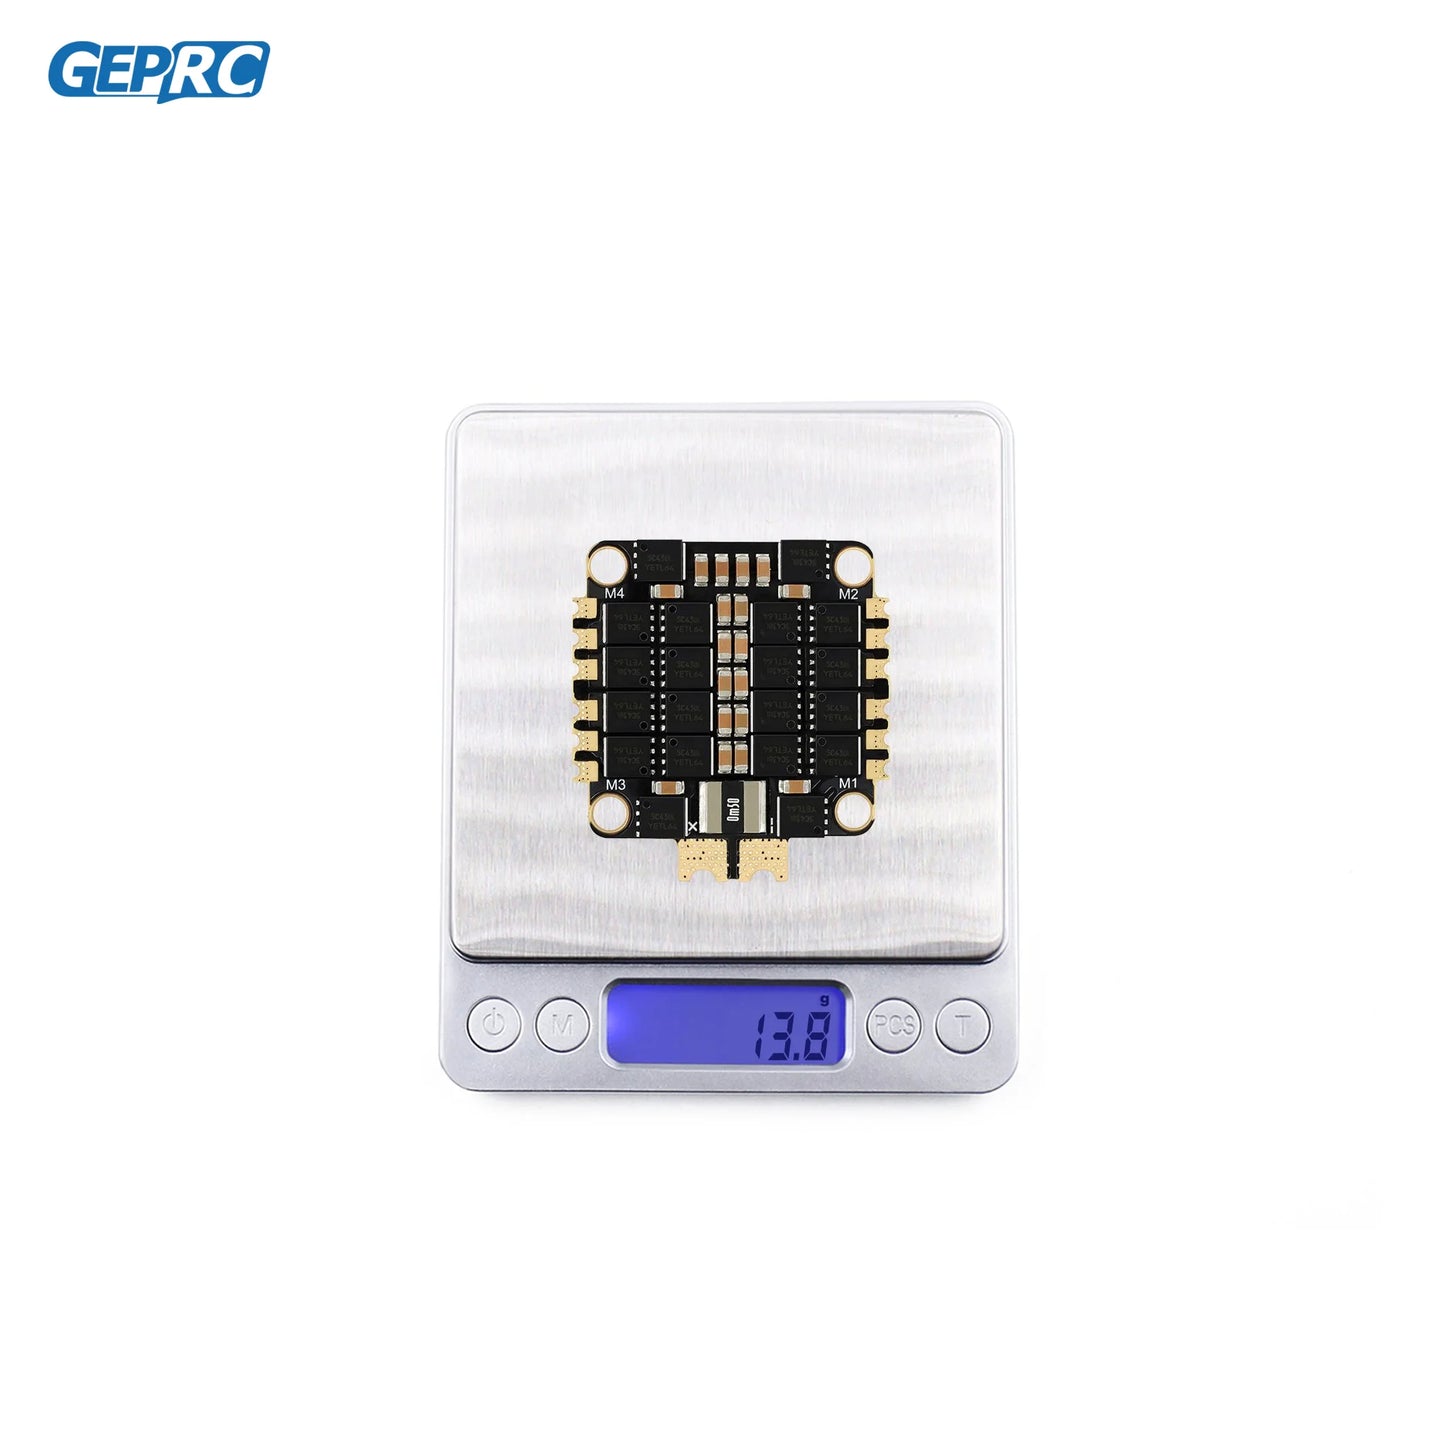 GEPRC GEP-BLS60A-4IN1 ESC - 3-6S 60A Support Dshot 150/300/600